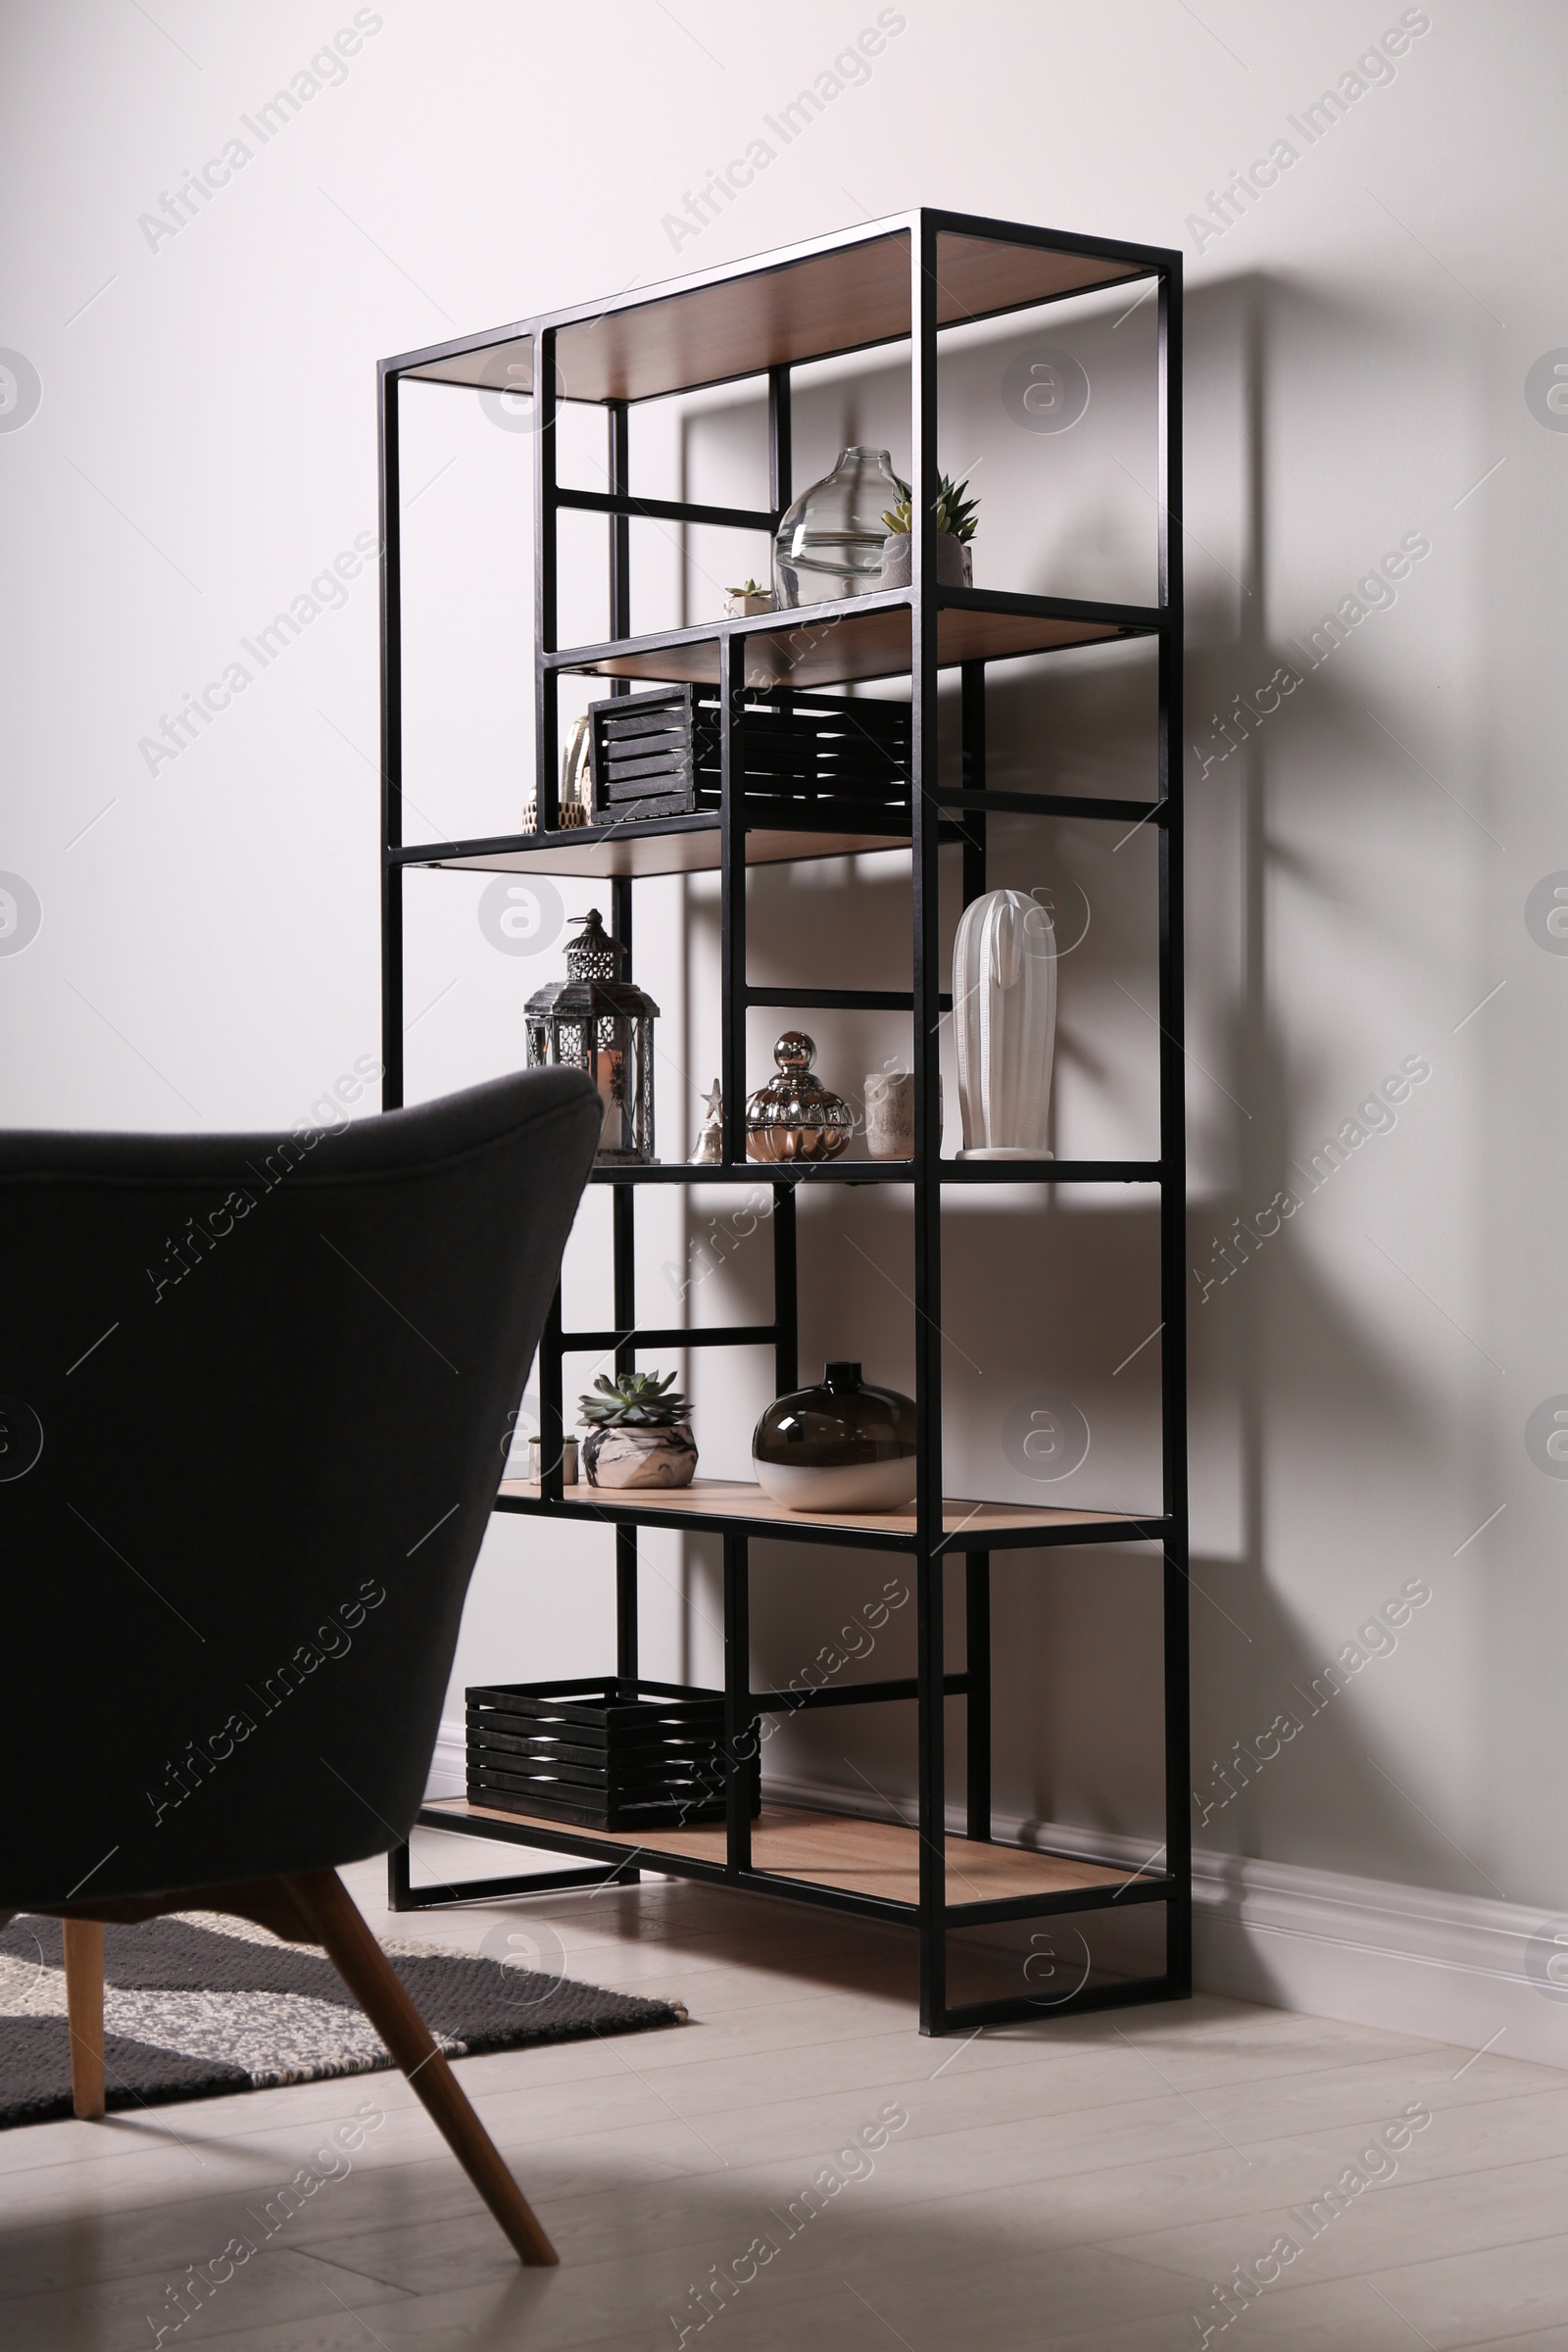 Photo of Shelving with different decor and houseplants near white wall in room. Interior design